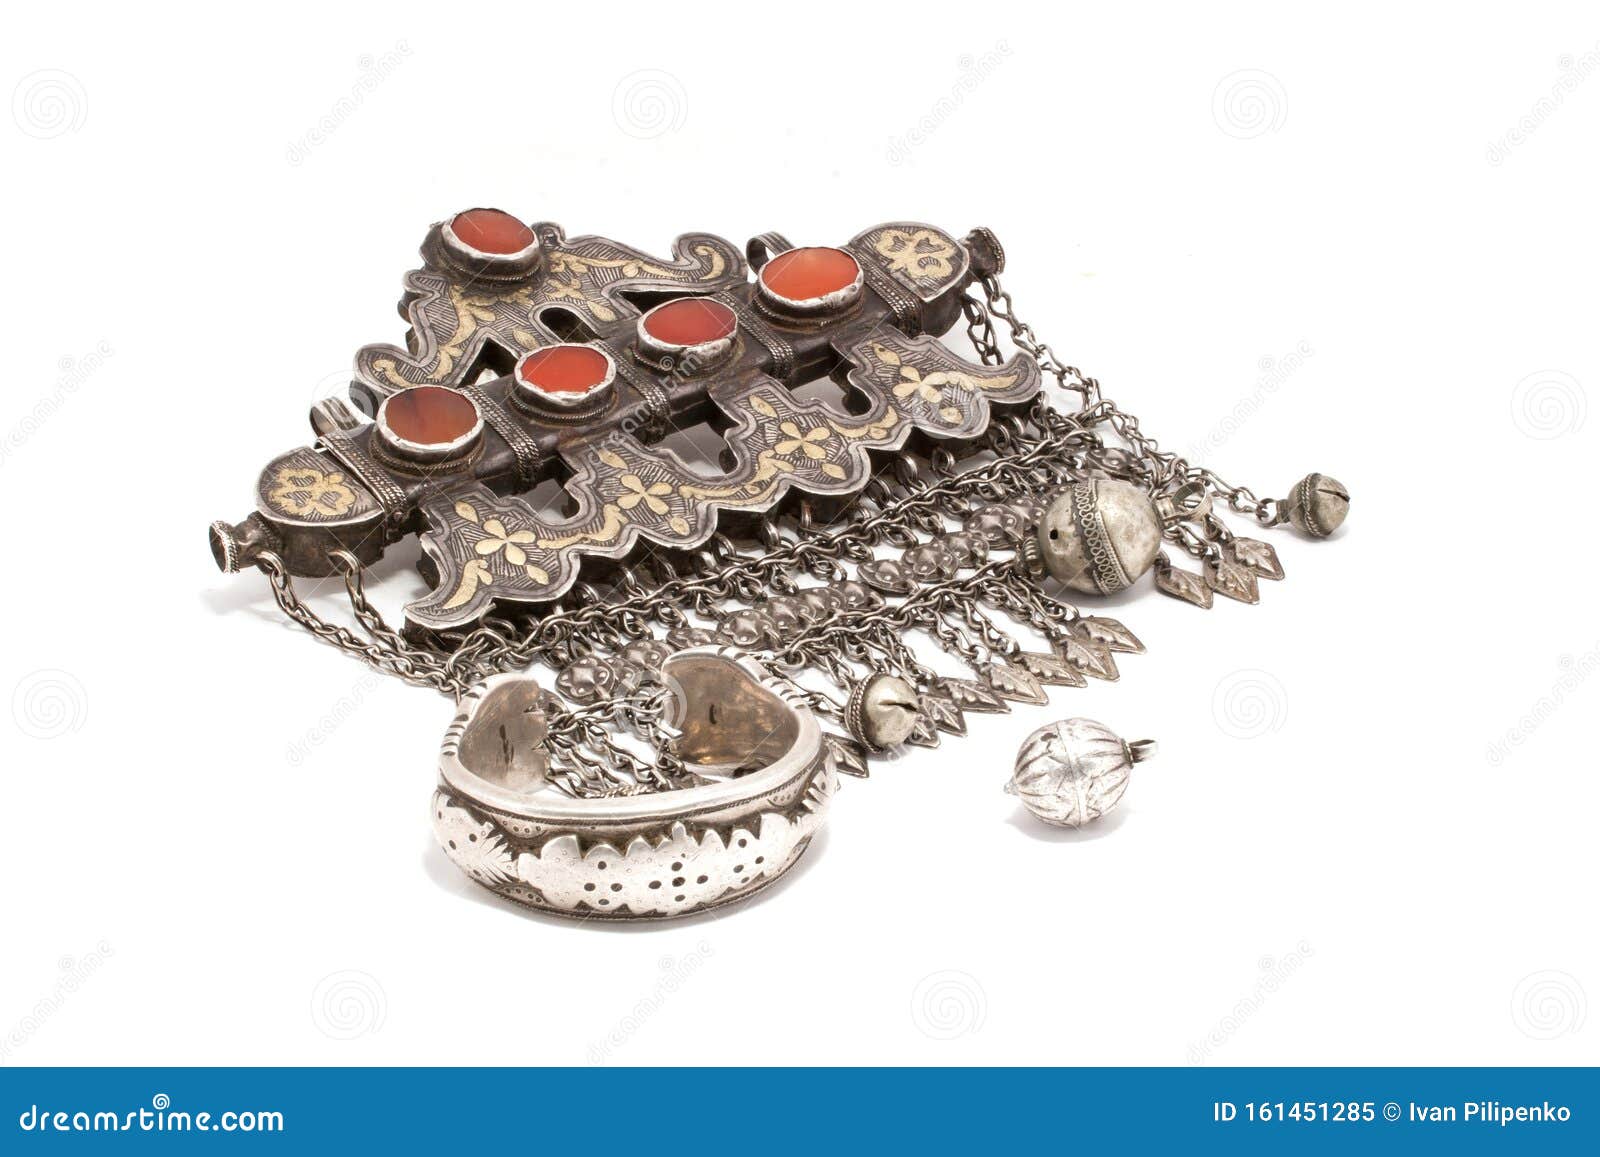 Central Asian Historical Antique Jewelry Stock Image - Image of asian ...